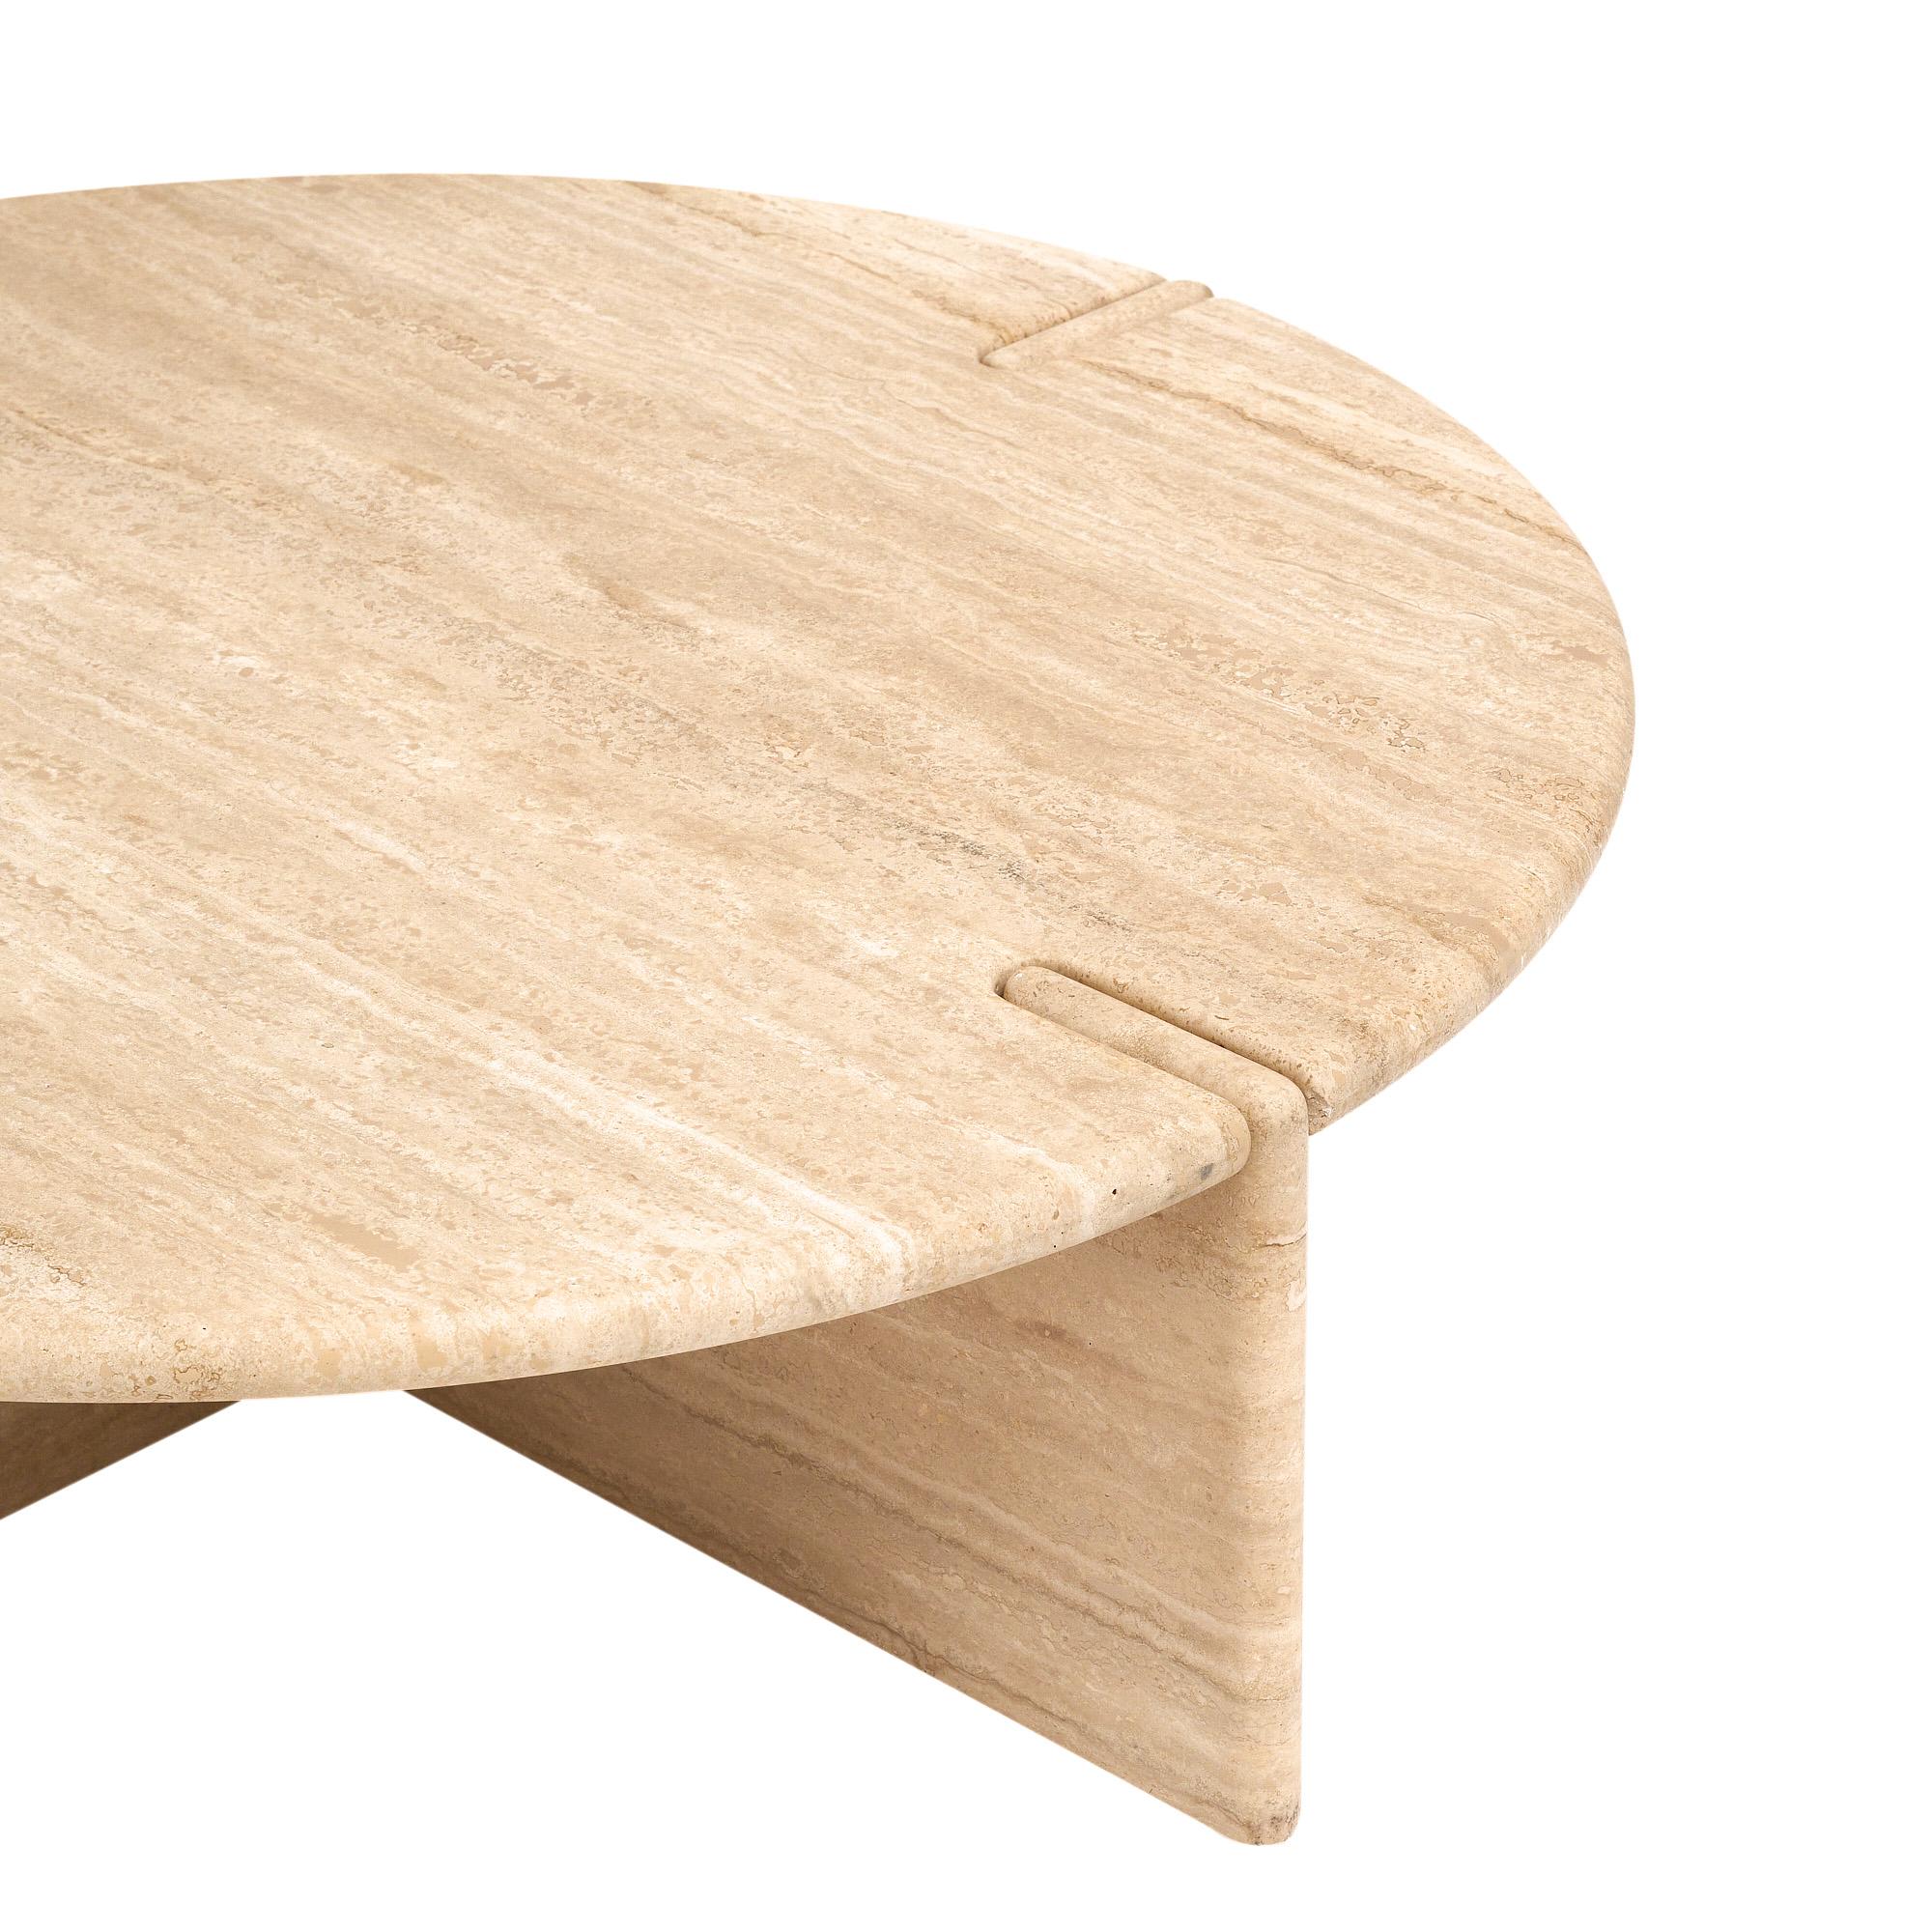 Coffee table from Italy in the mid-century style. This piece is made with a large travertine circular slab that fits atop two overlapping pieces of travertine that form the four legs when combined. It is a superb design that showcases the clean